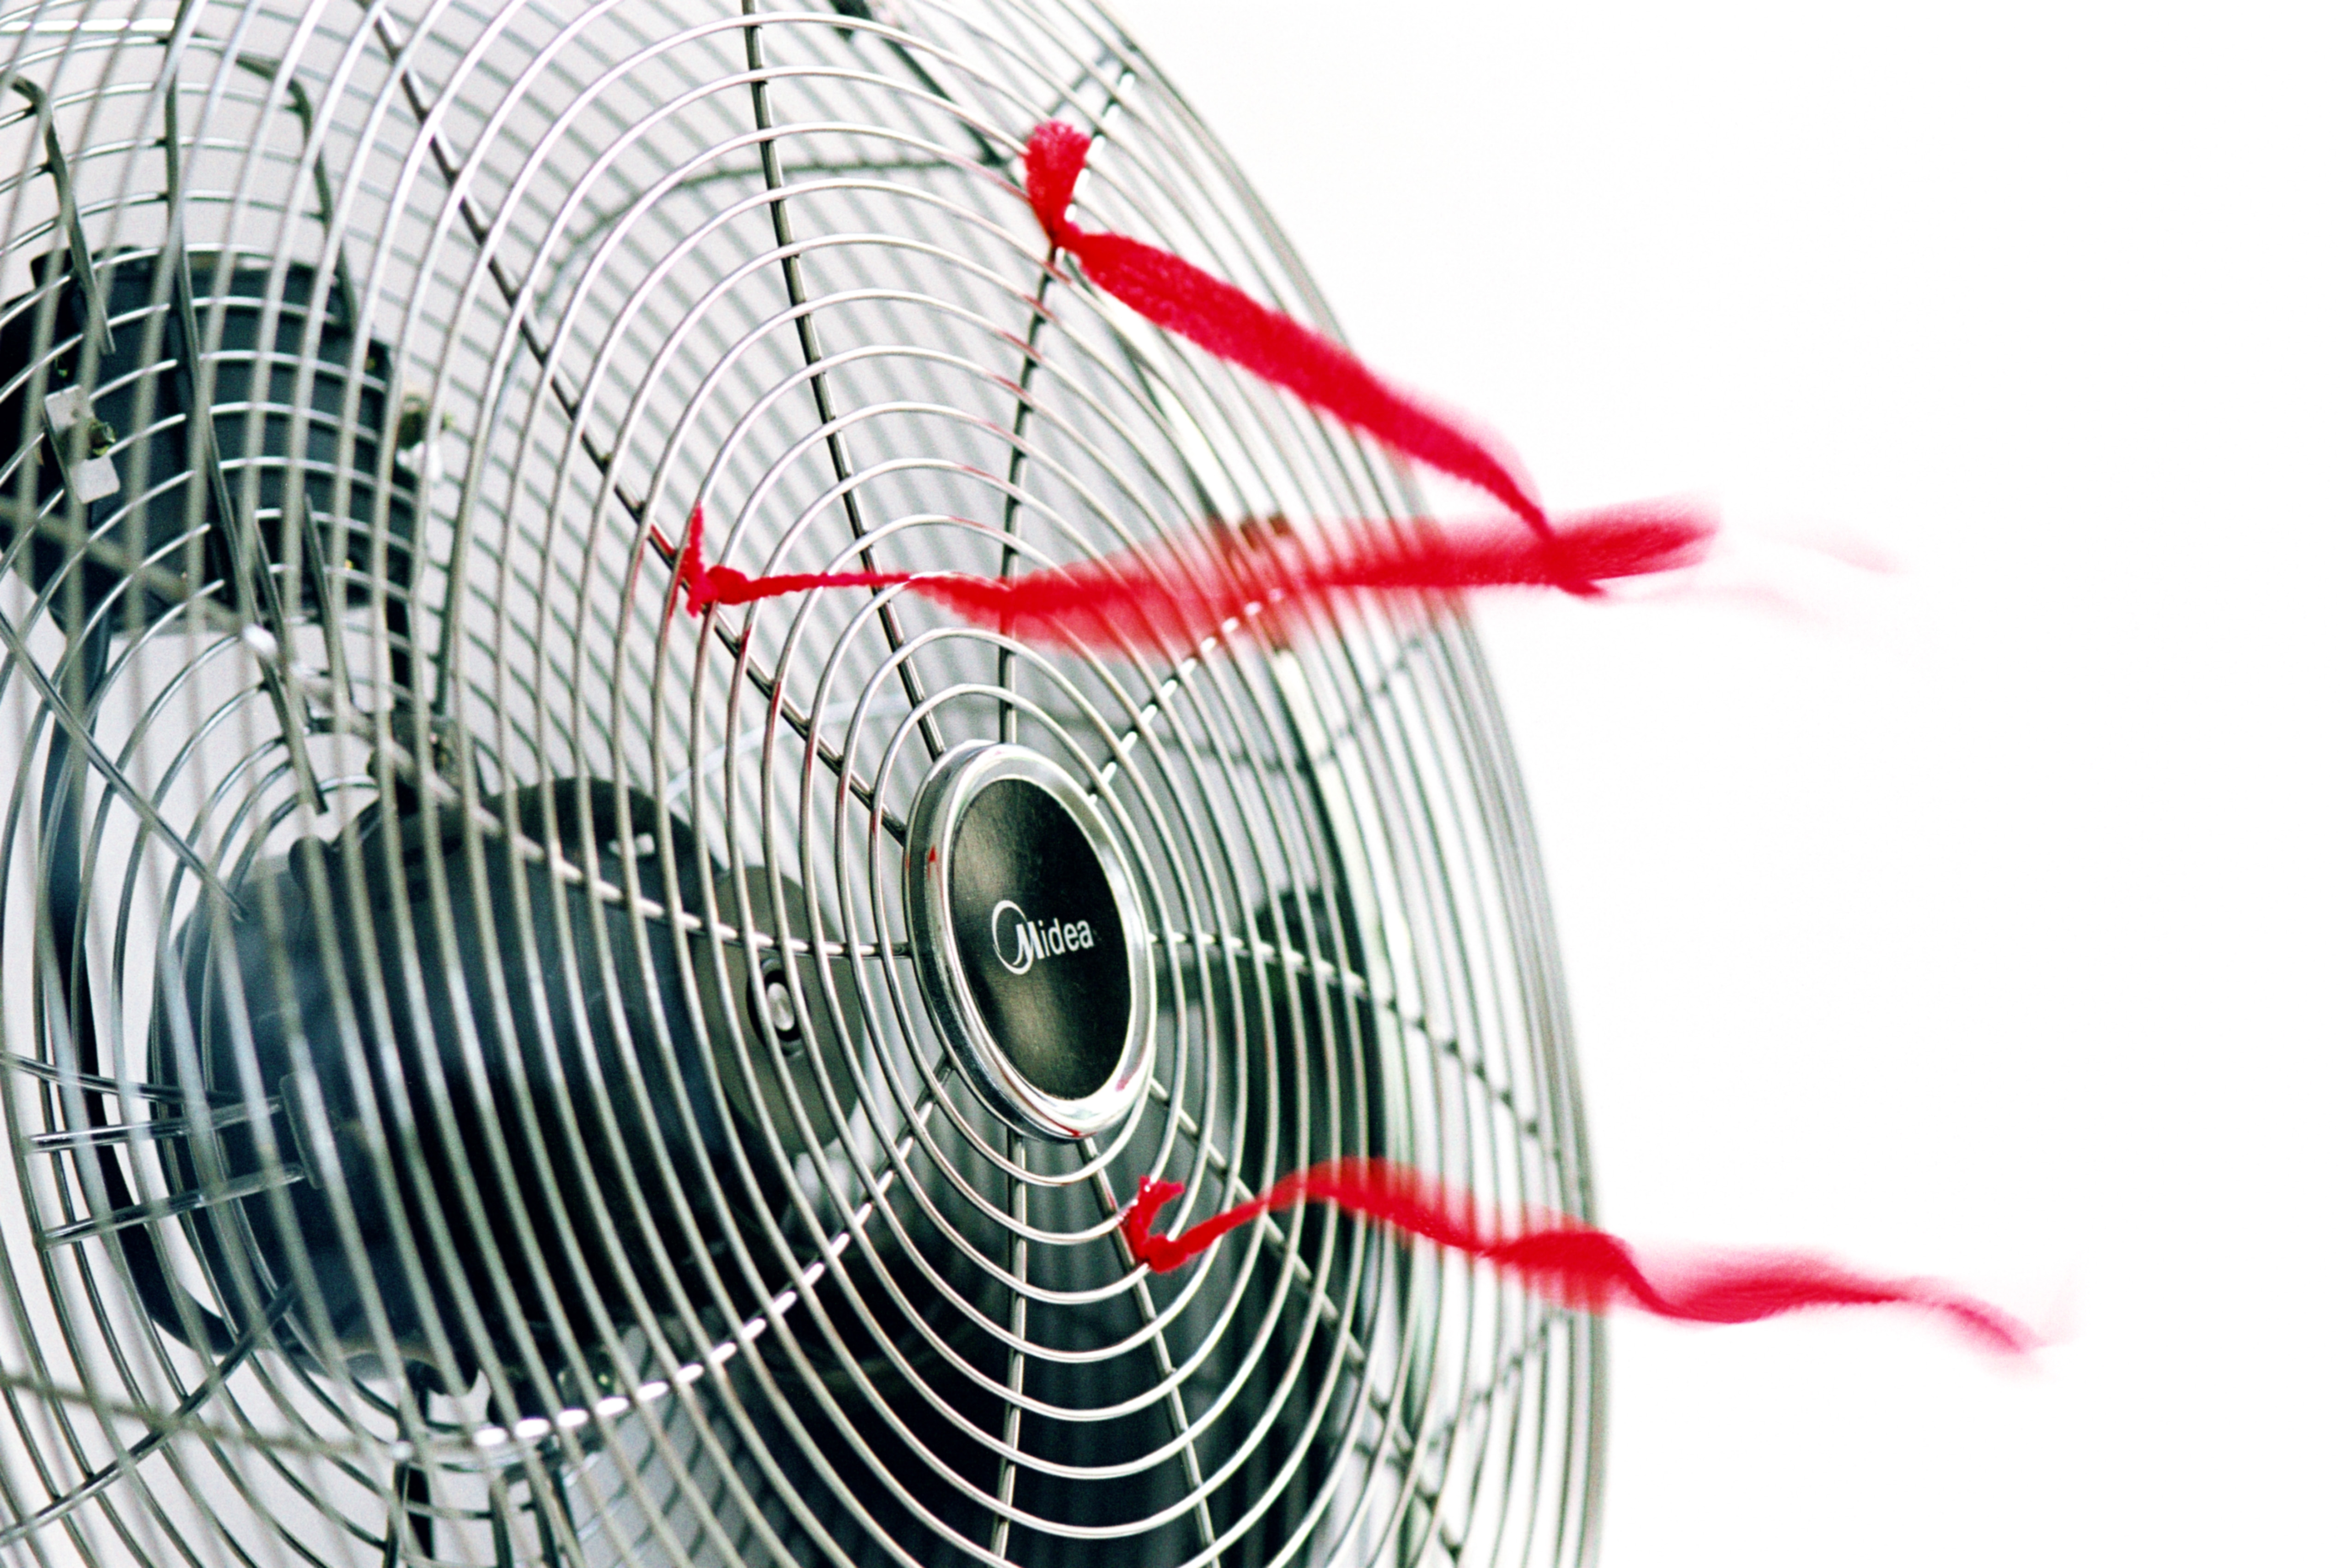 Fans Can Hotter in Some Conditions, Says New Study | Time